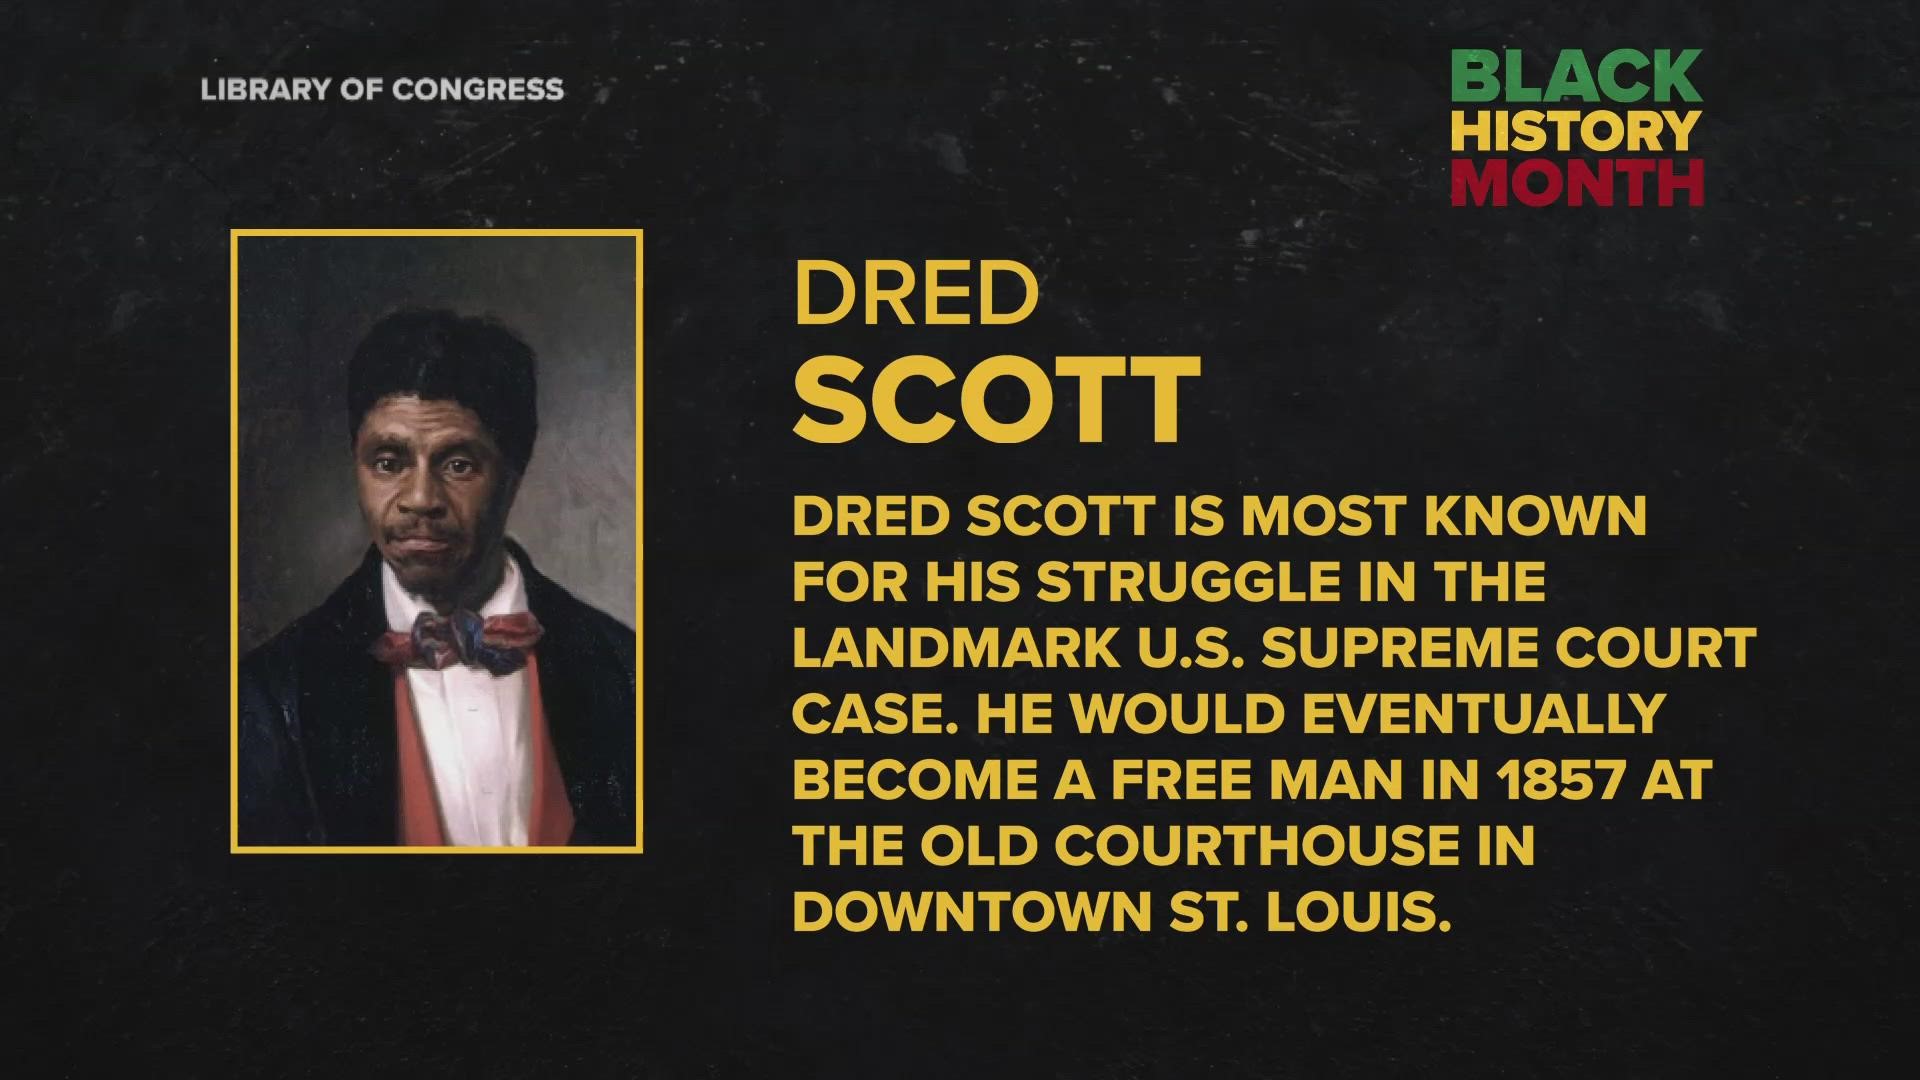 Dred Scott is most known for his struggle in the landmark U.S. Supreme Court case. He would become a free man in 1857 at the Old Courthouse in downtown St. Louis.